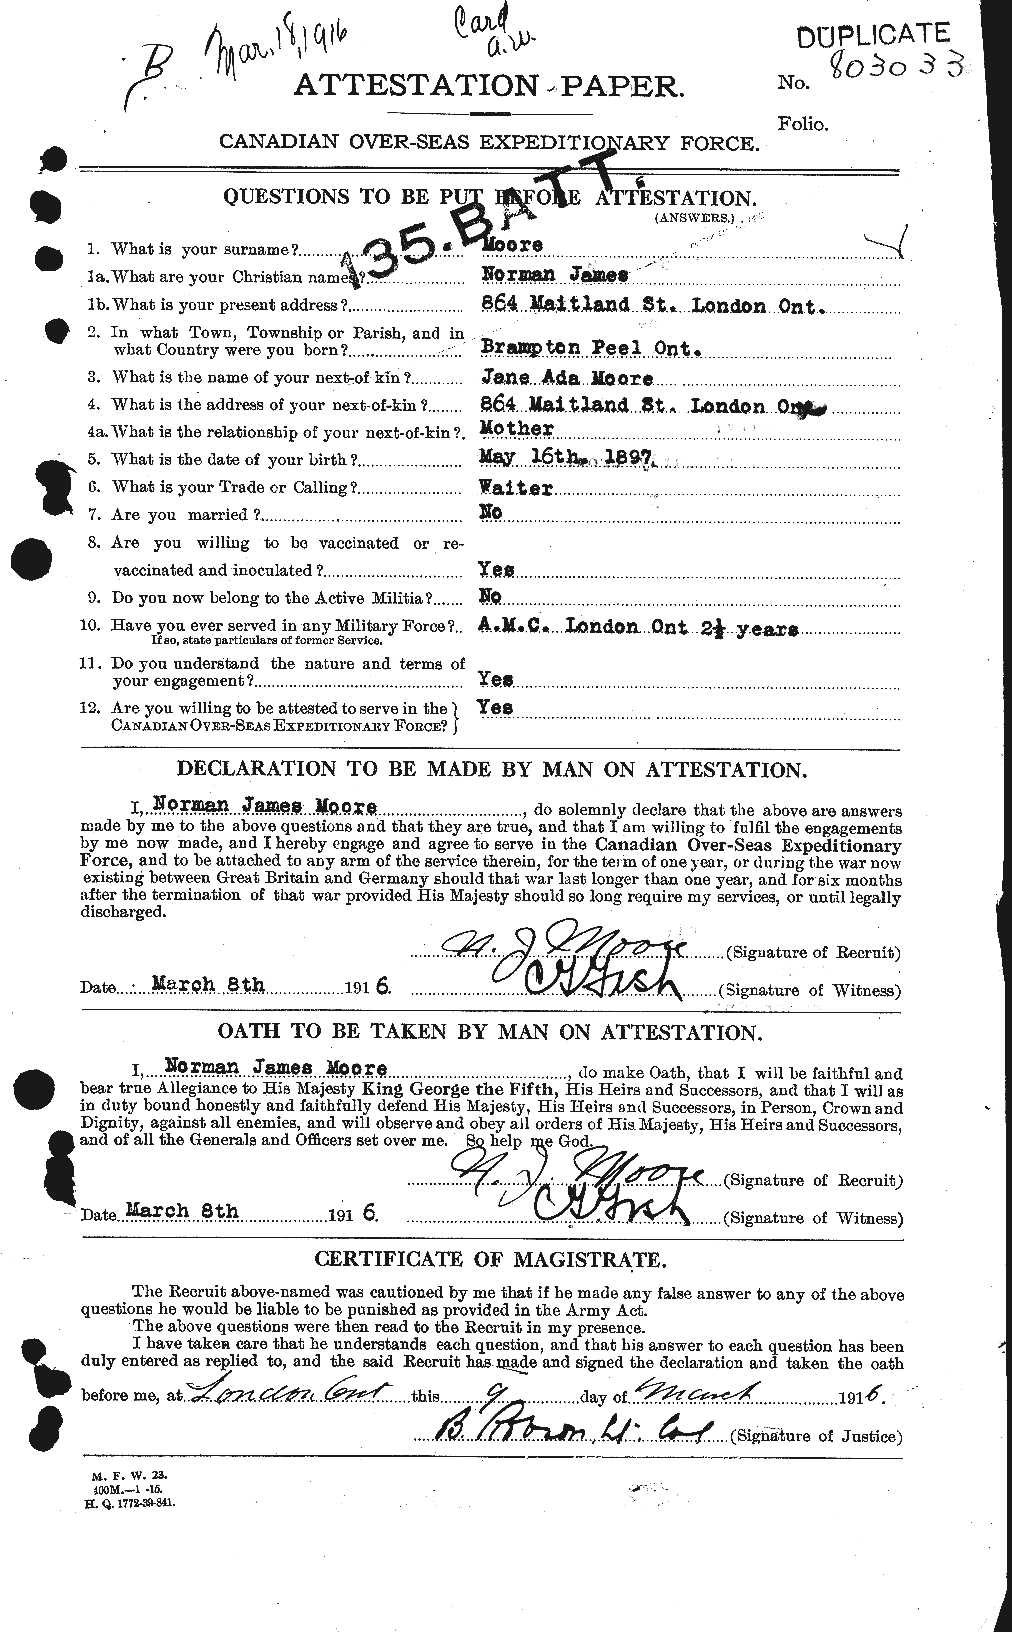 Personnel Records of the First World War - CEF 503464a